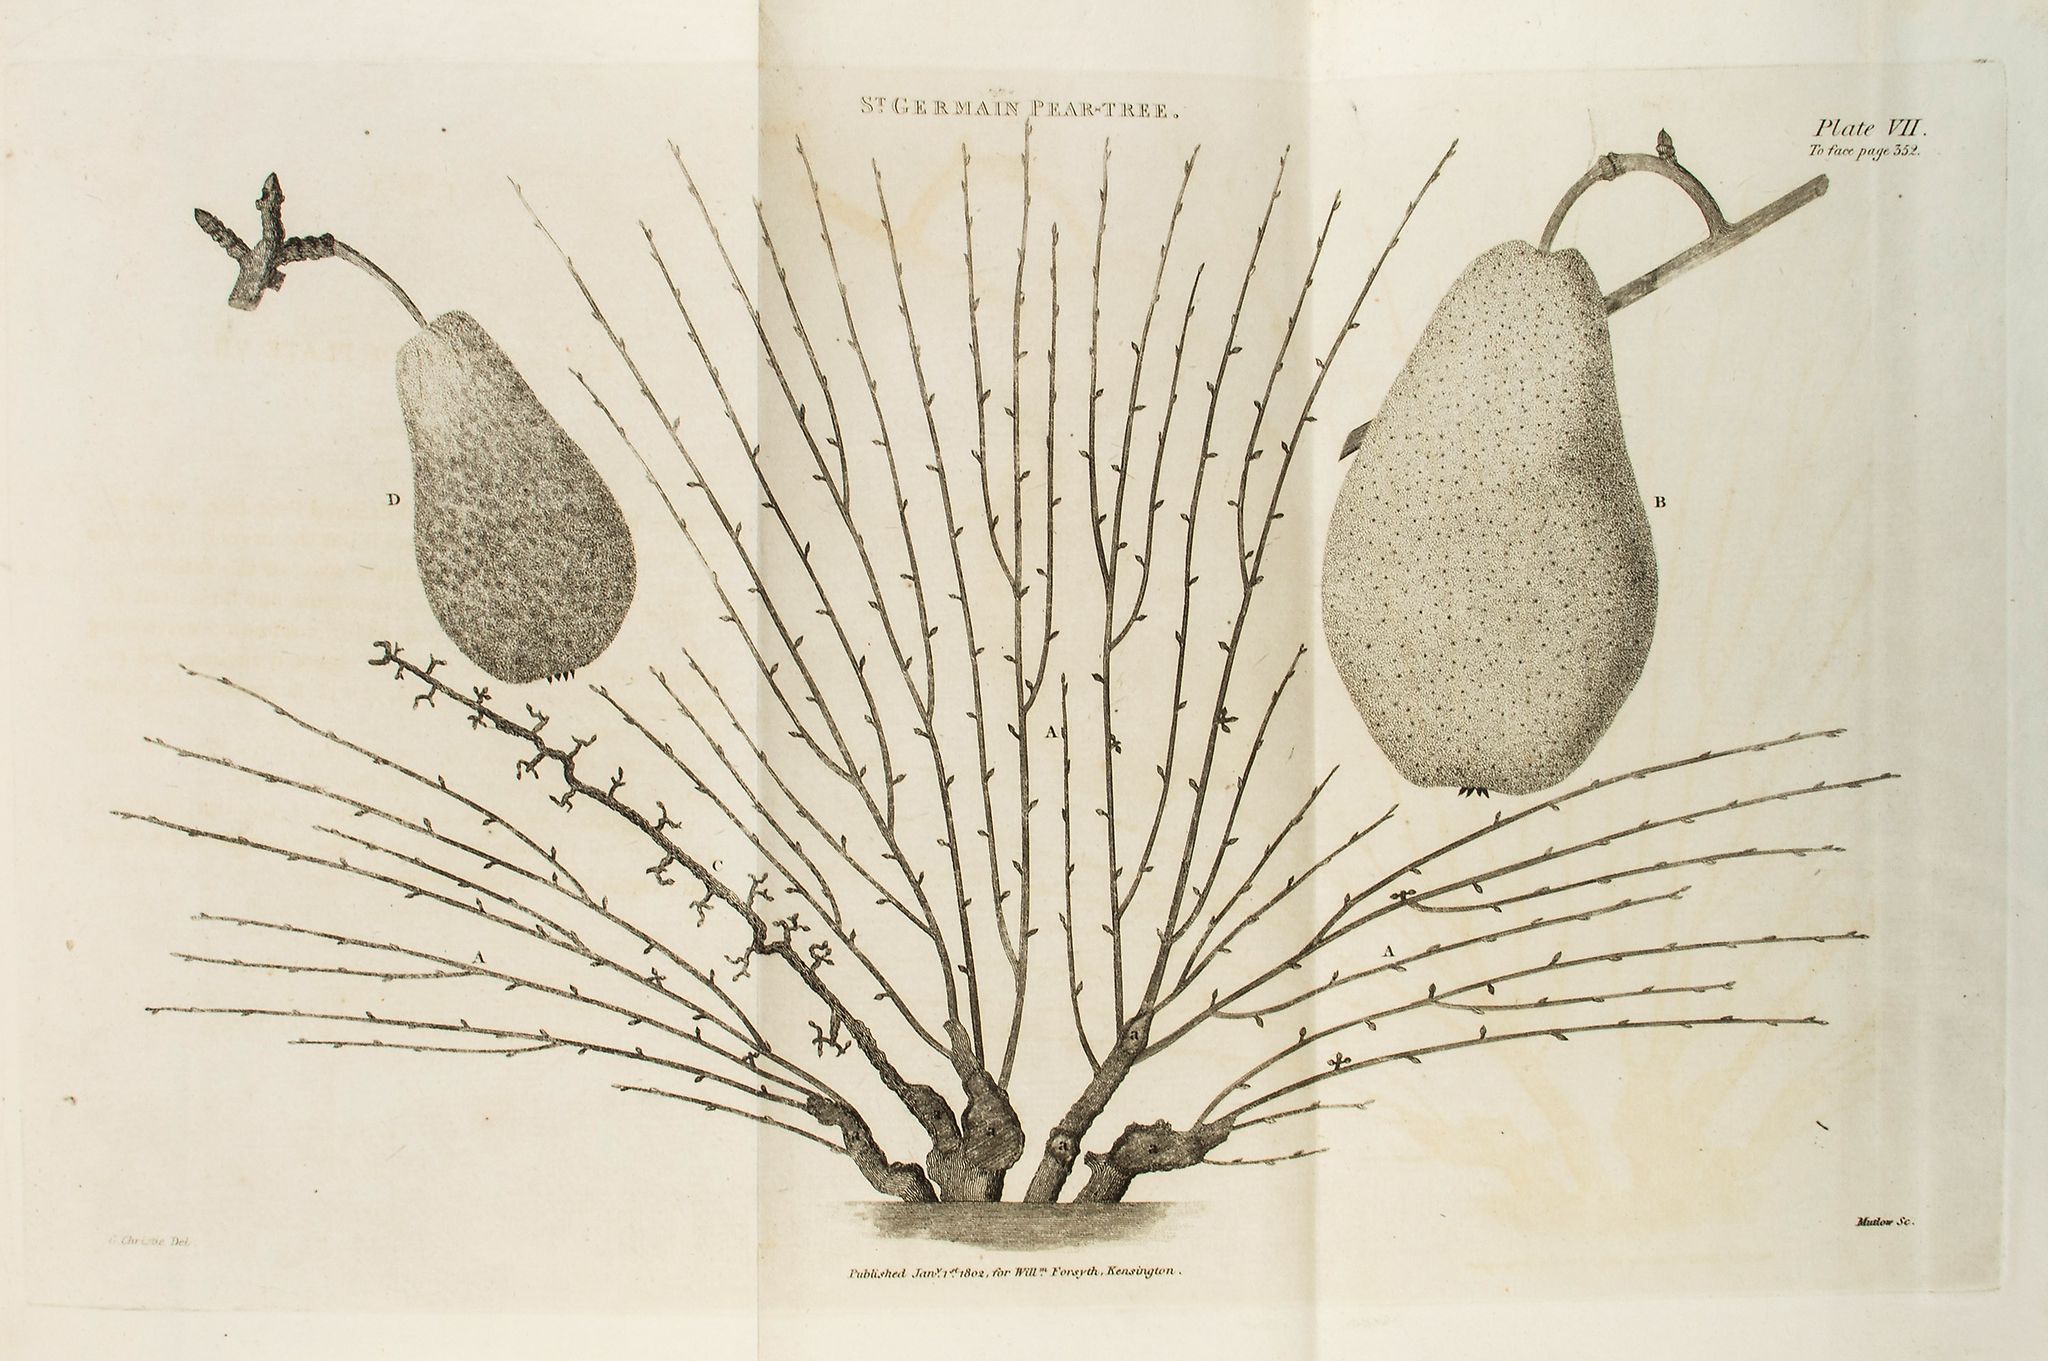 Forsyth (William) - A Treatise on the Culture and Management of Fruit-Trees,  first edition  , - Image 2 of 2